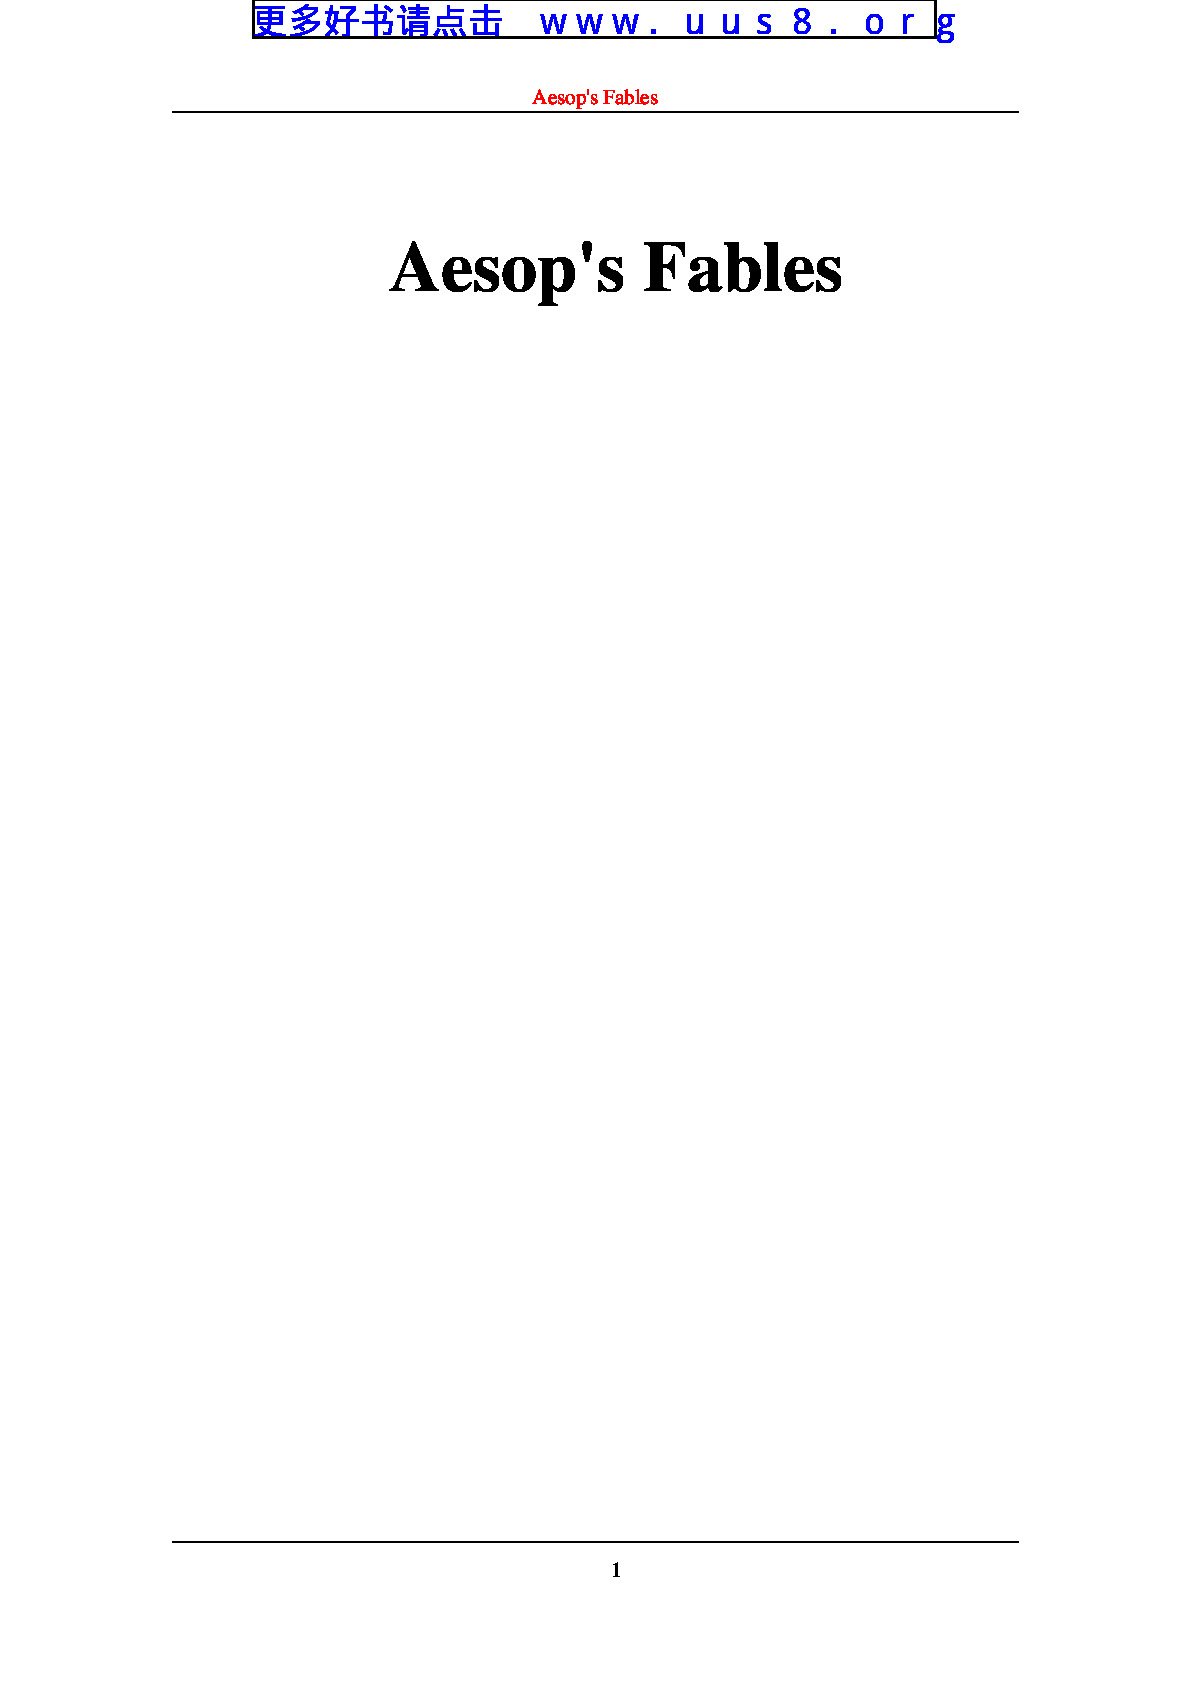 Aesop’s_Fables(伊索寓言)